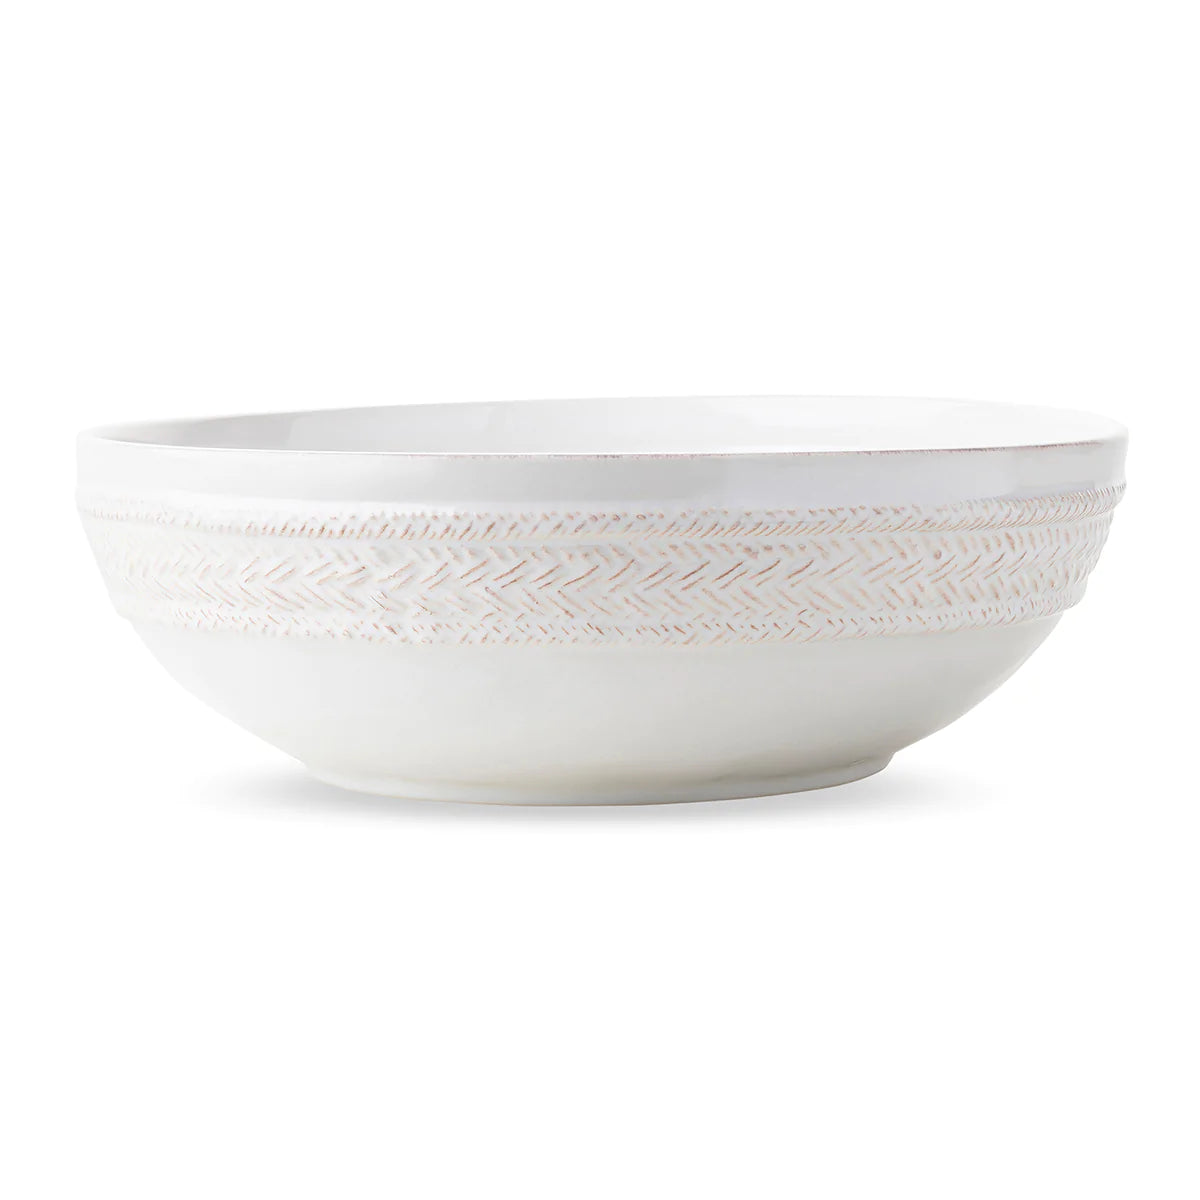 white ceramic bowl with basket weave design along the outer edge.